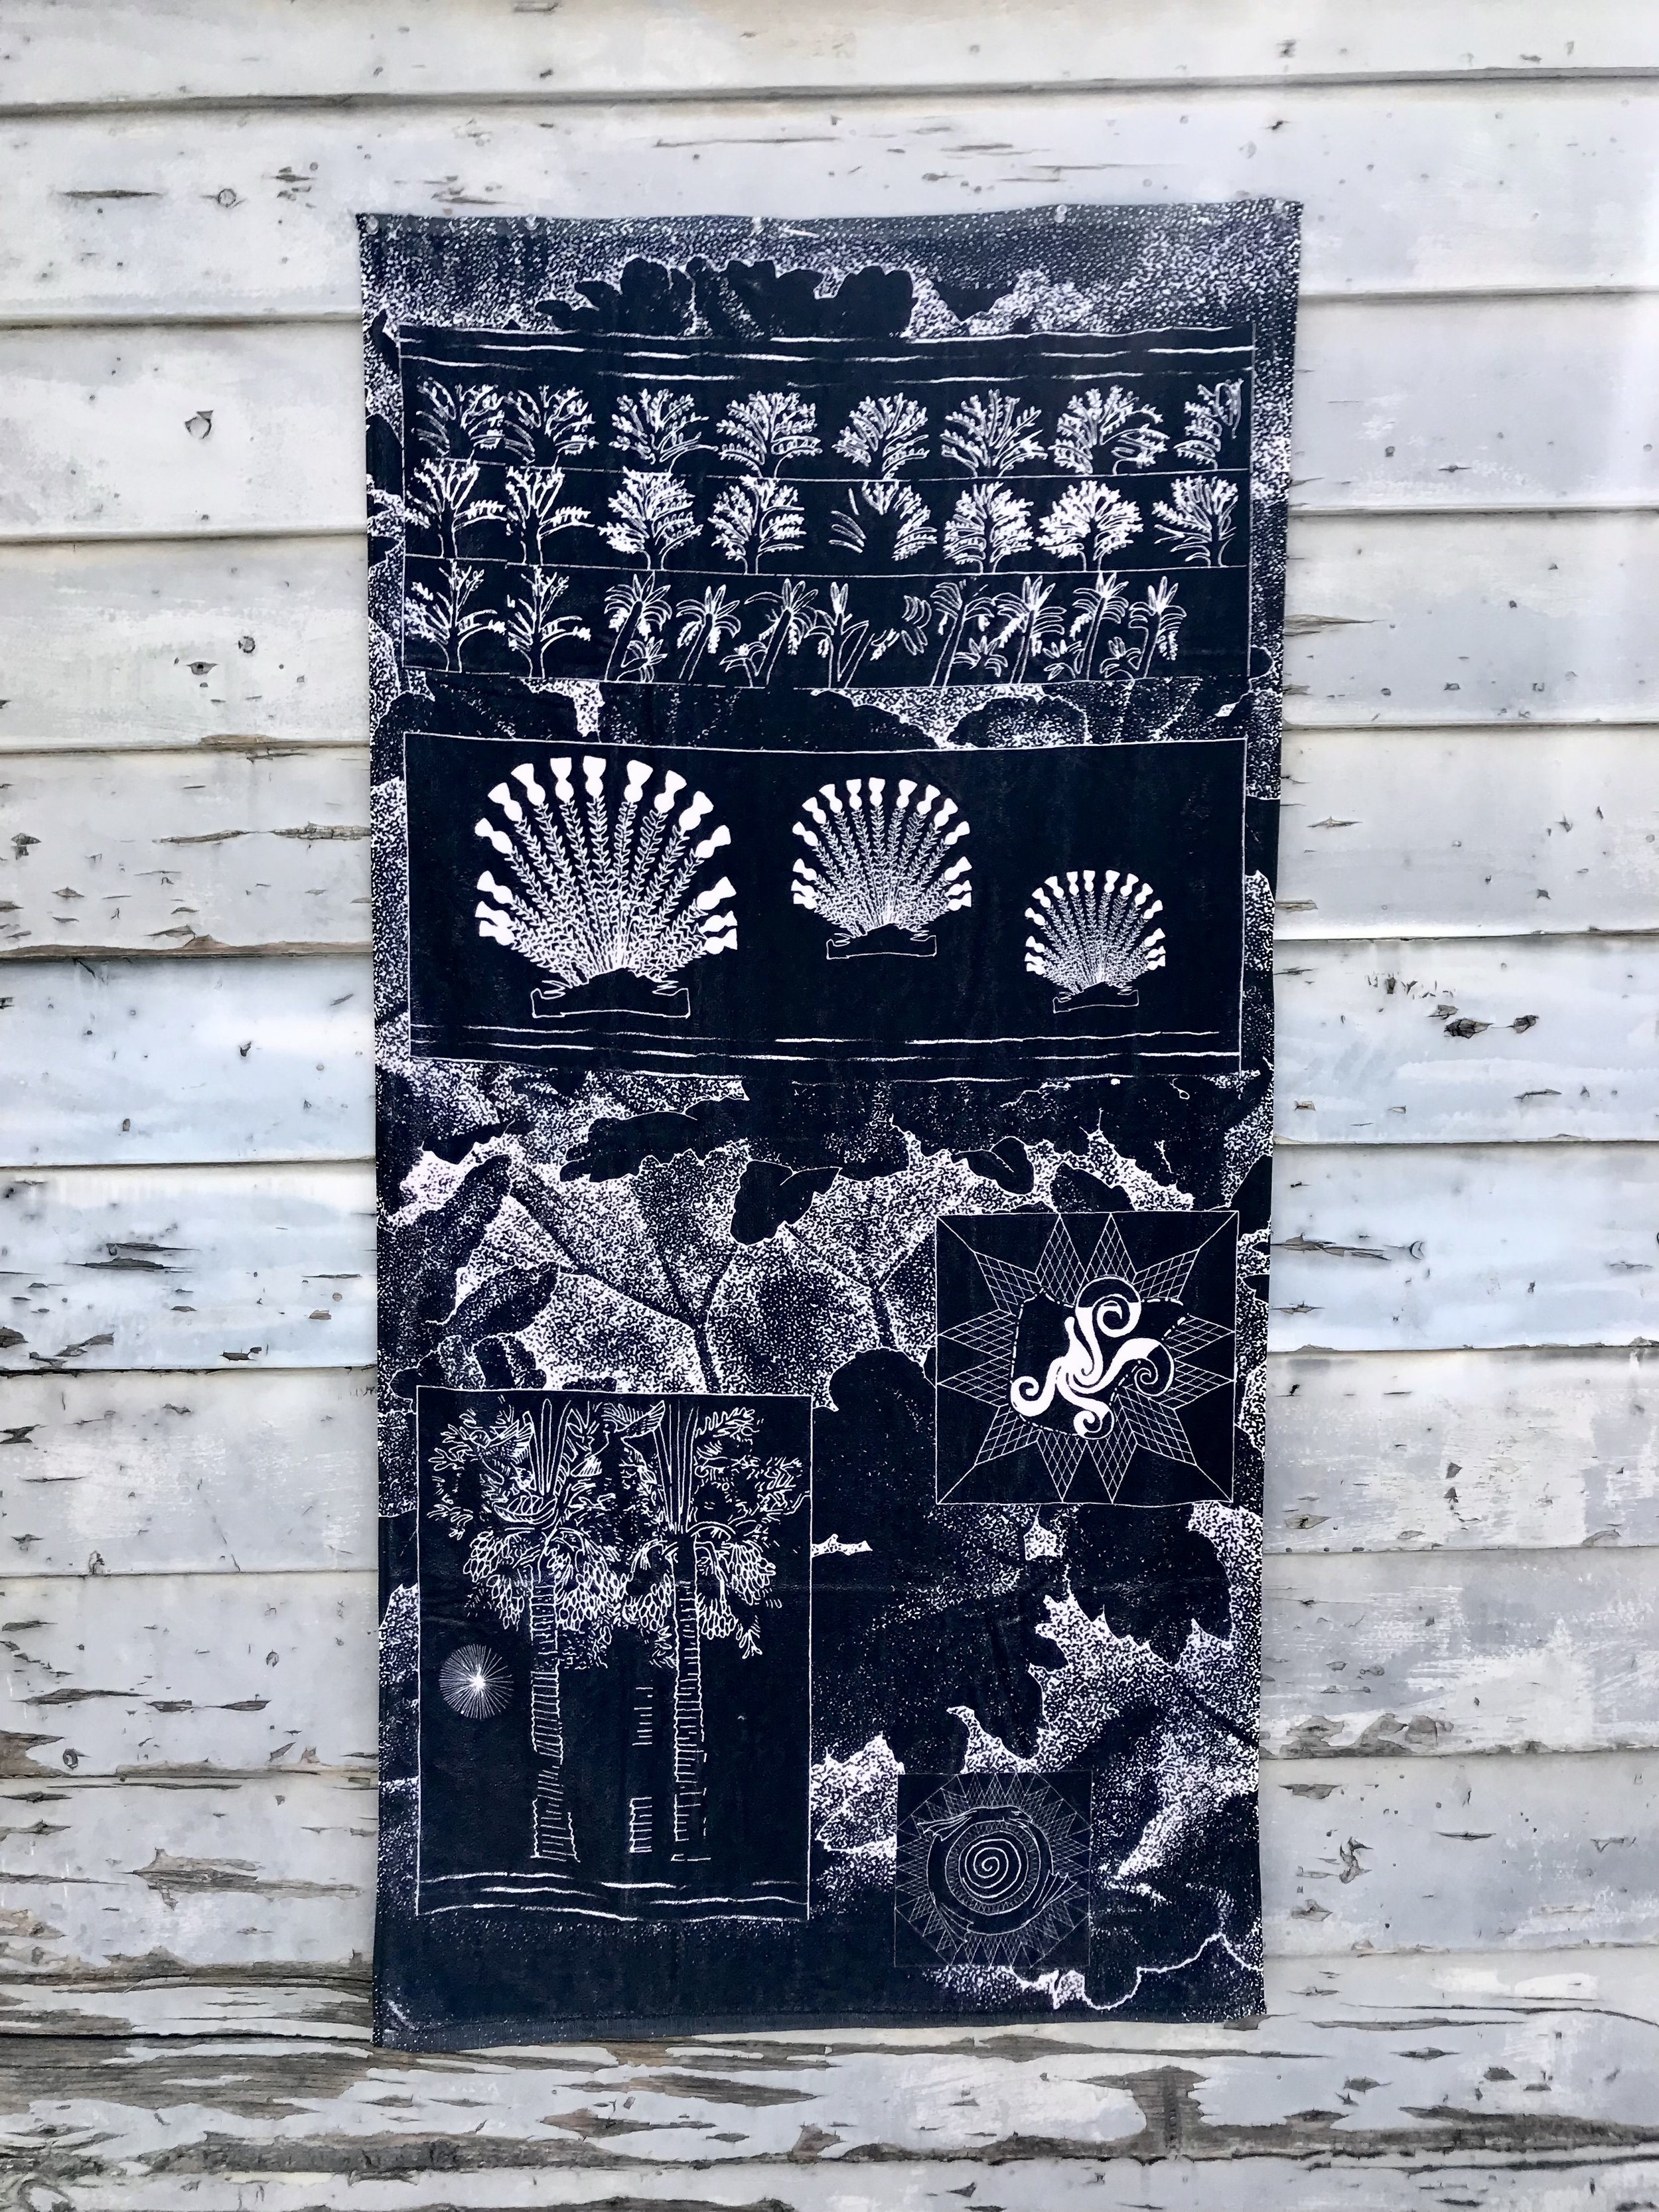  Seashore at Night beach towel  Dye sublimation on cotton terry  30” x 60”  2022 